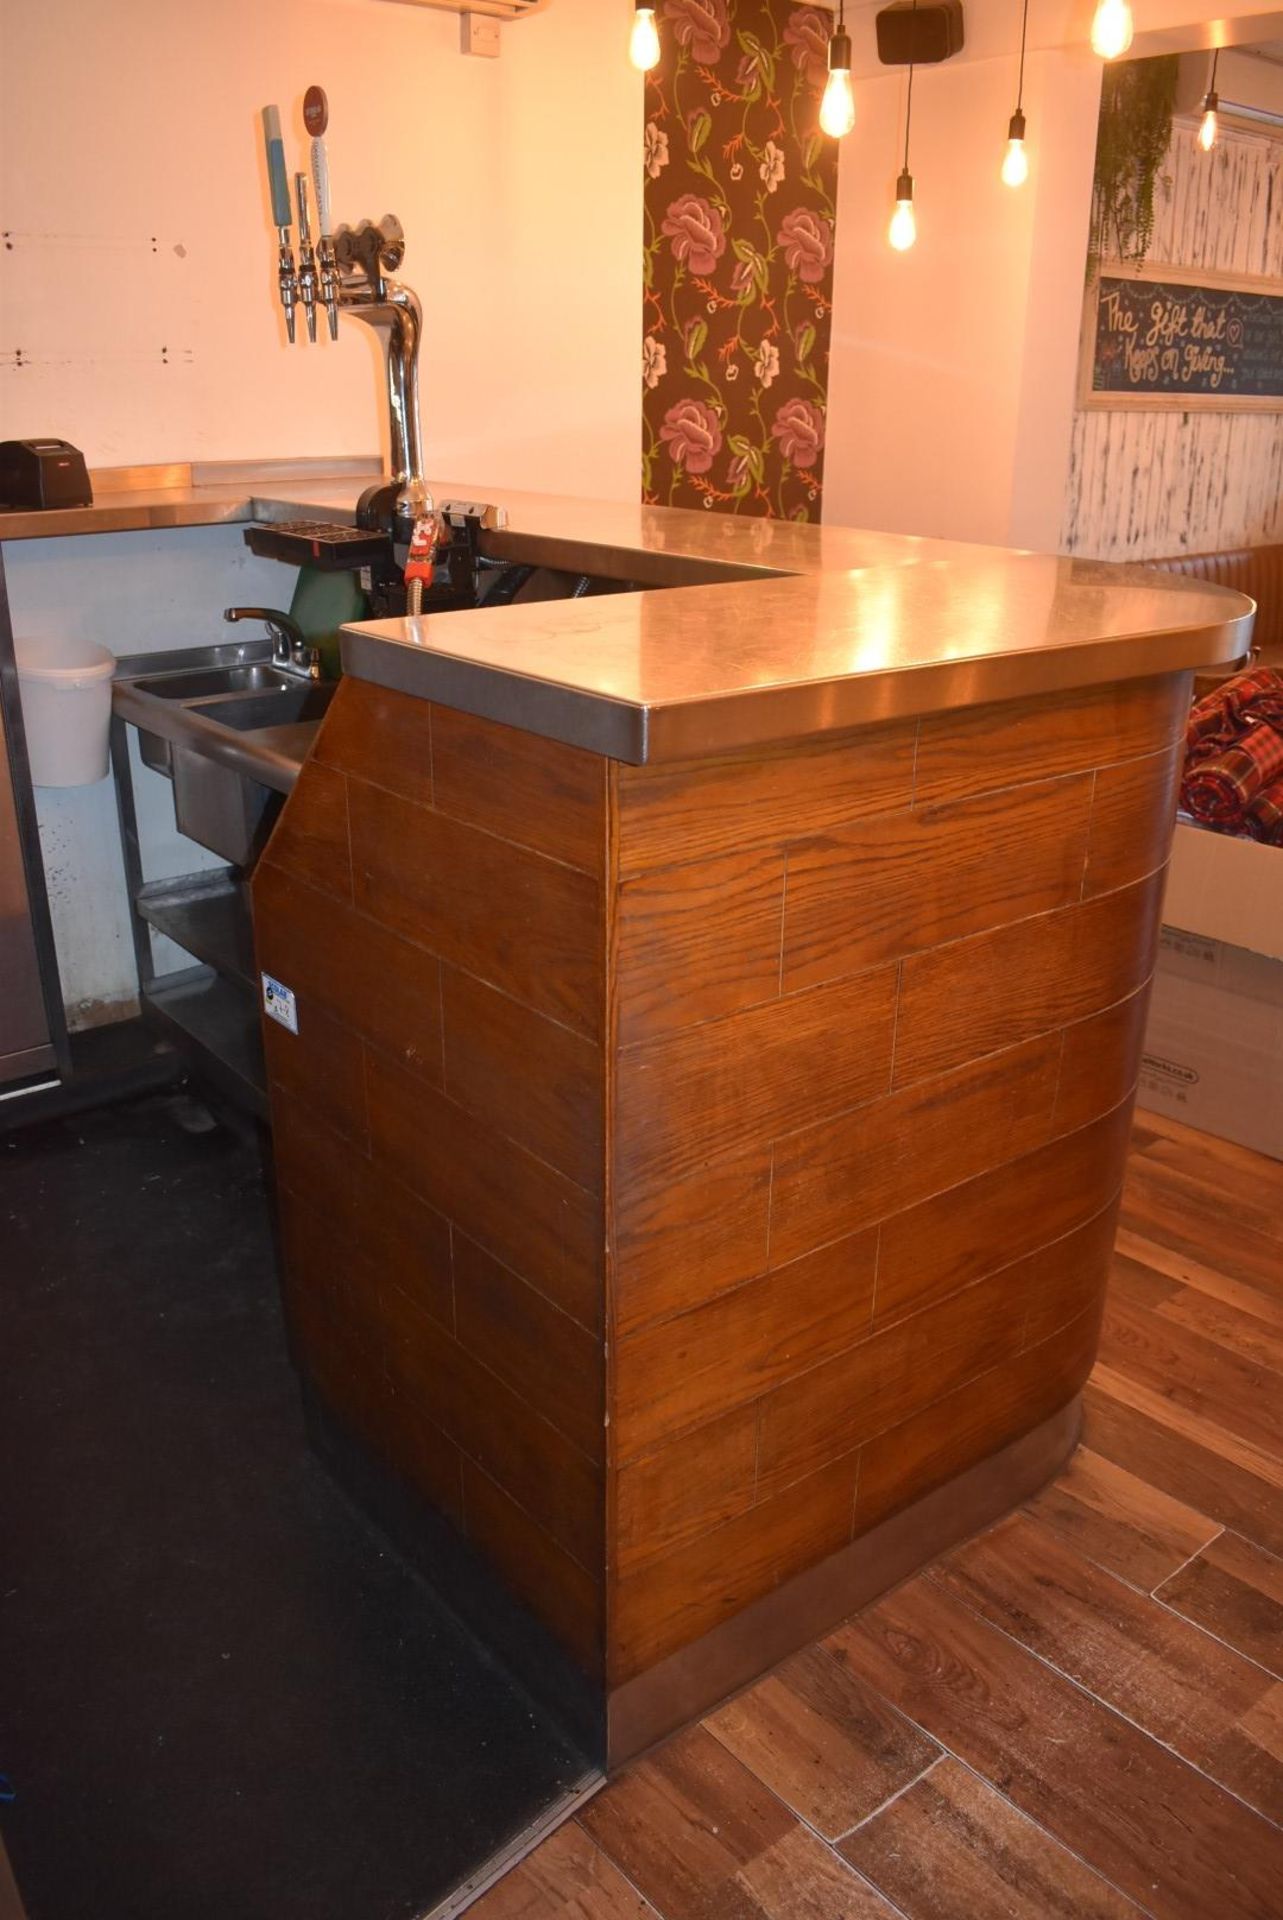 1 x Contemporary Curved Wooden Drinks Bar Featuring a Stainless Steel Bartop and Backbar - Image 17 of 22